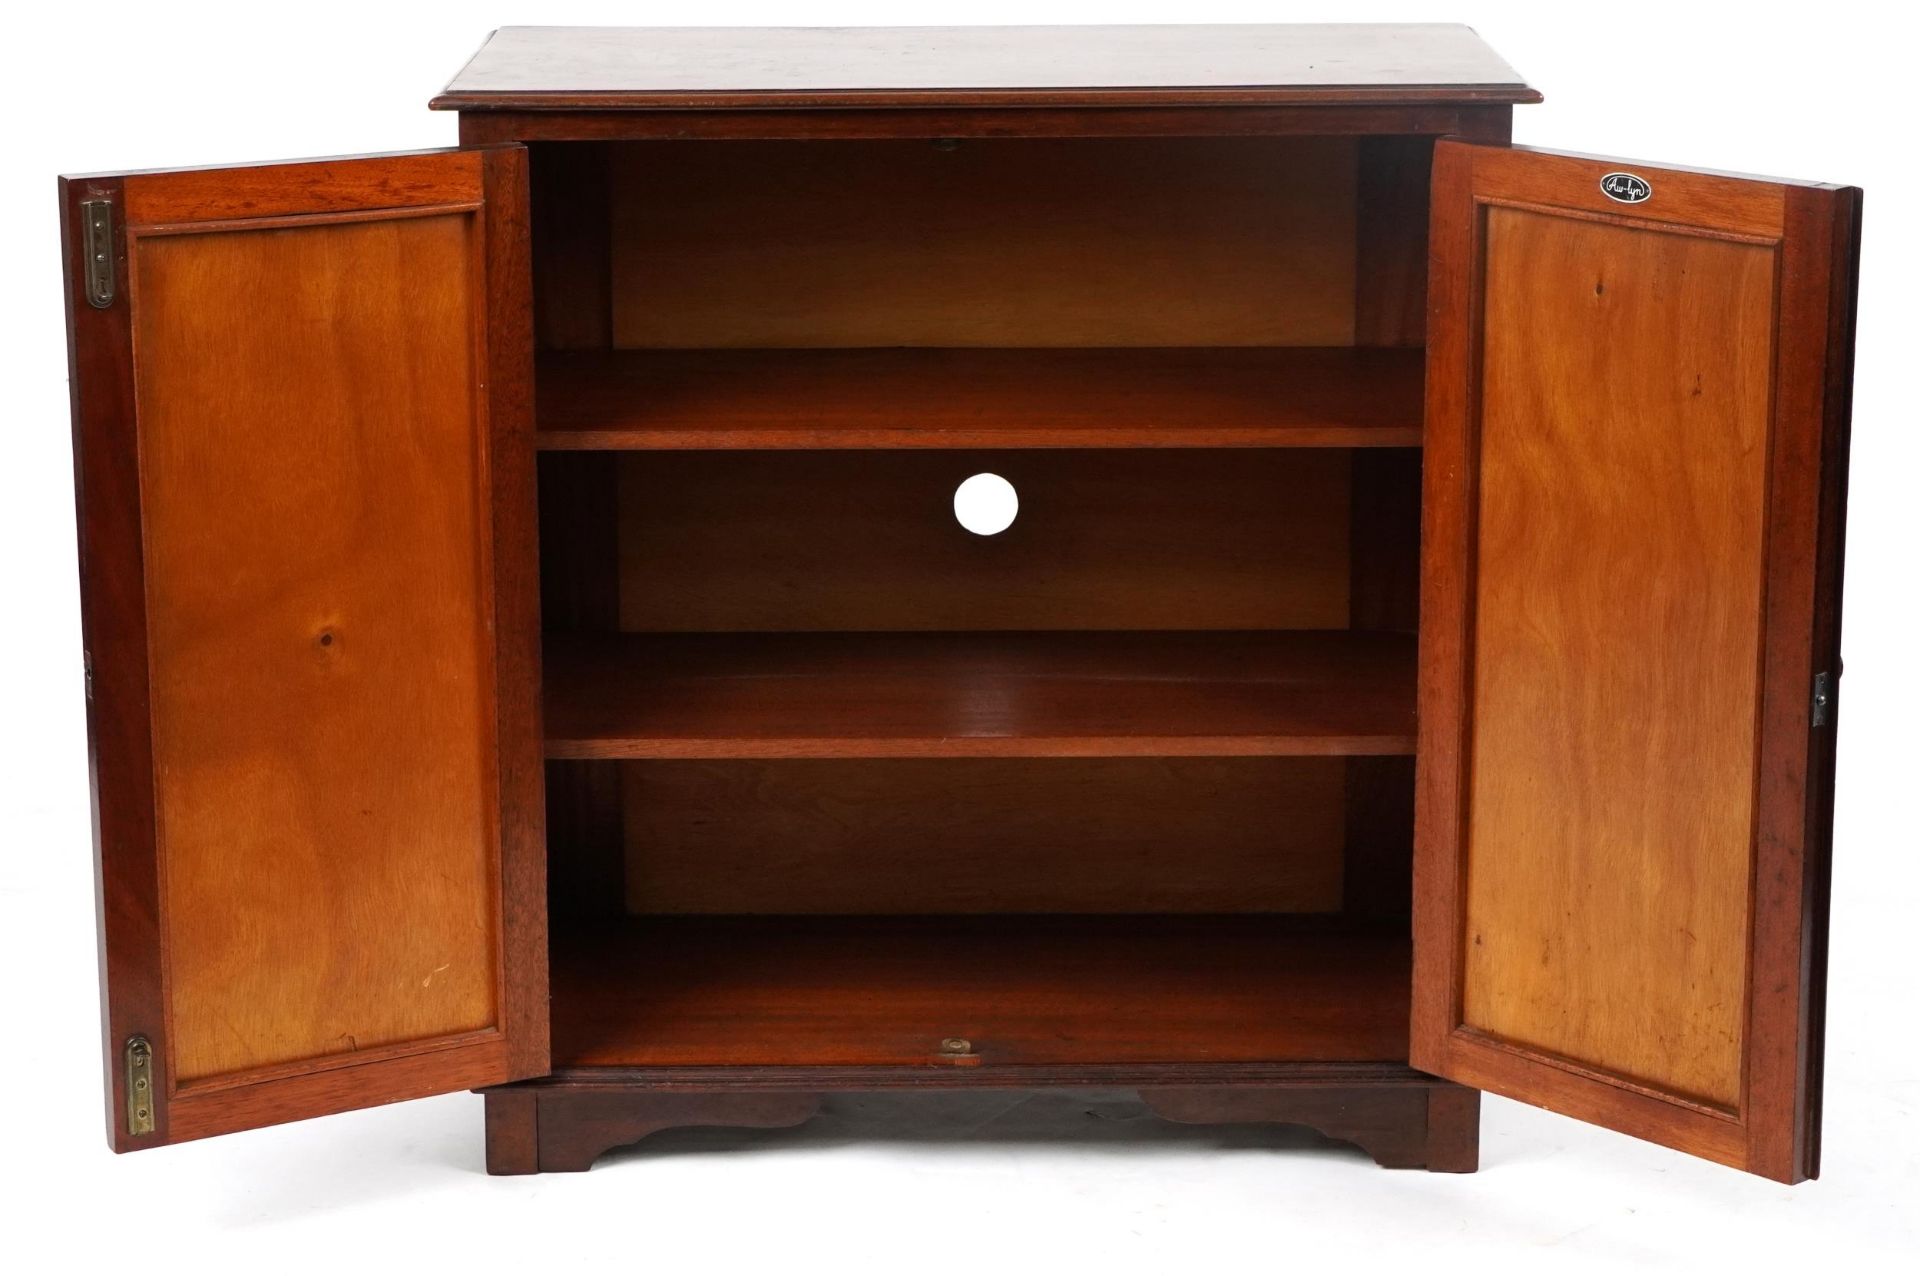 Aw-Lyn, mahogany two door cupboard enclosing three shelves, 78cm H x 75cm W x 36cm D : For further - Image 3 of 6